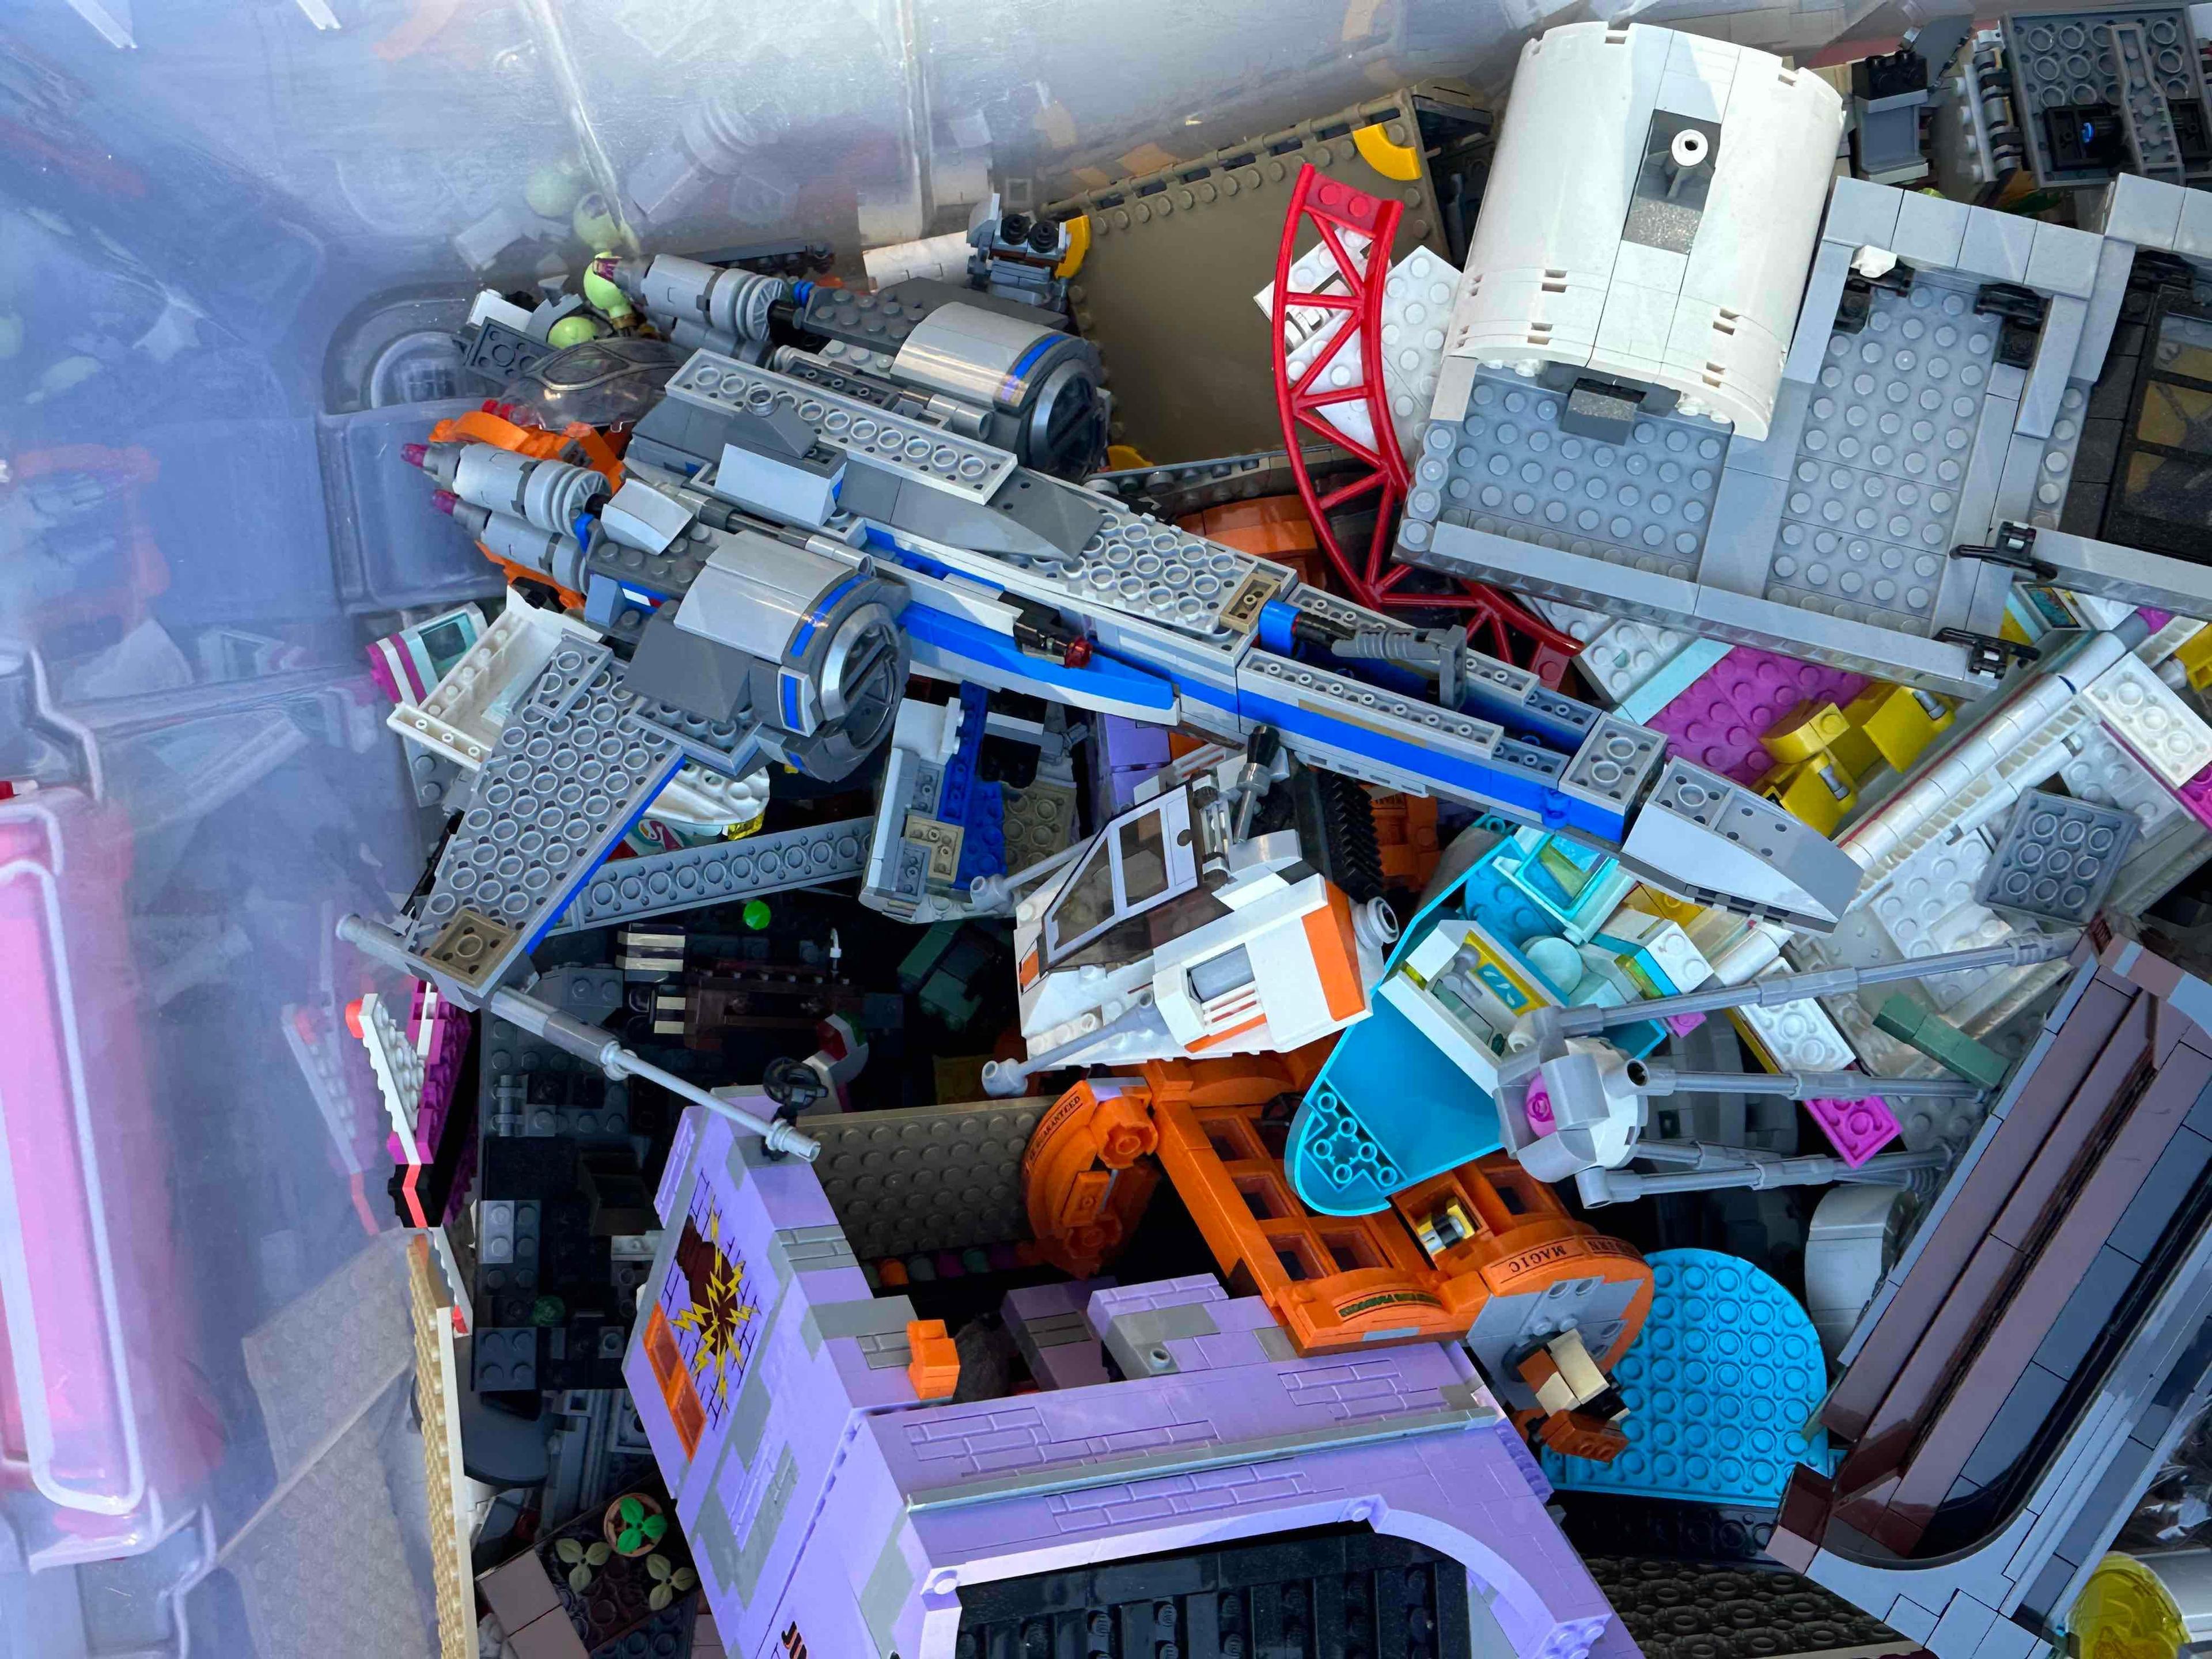 Massive 50lb 4.5 Foot Bin of Lego Sets and Figures Star Wars, Baby Yoda, Racing Cars, Alien more